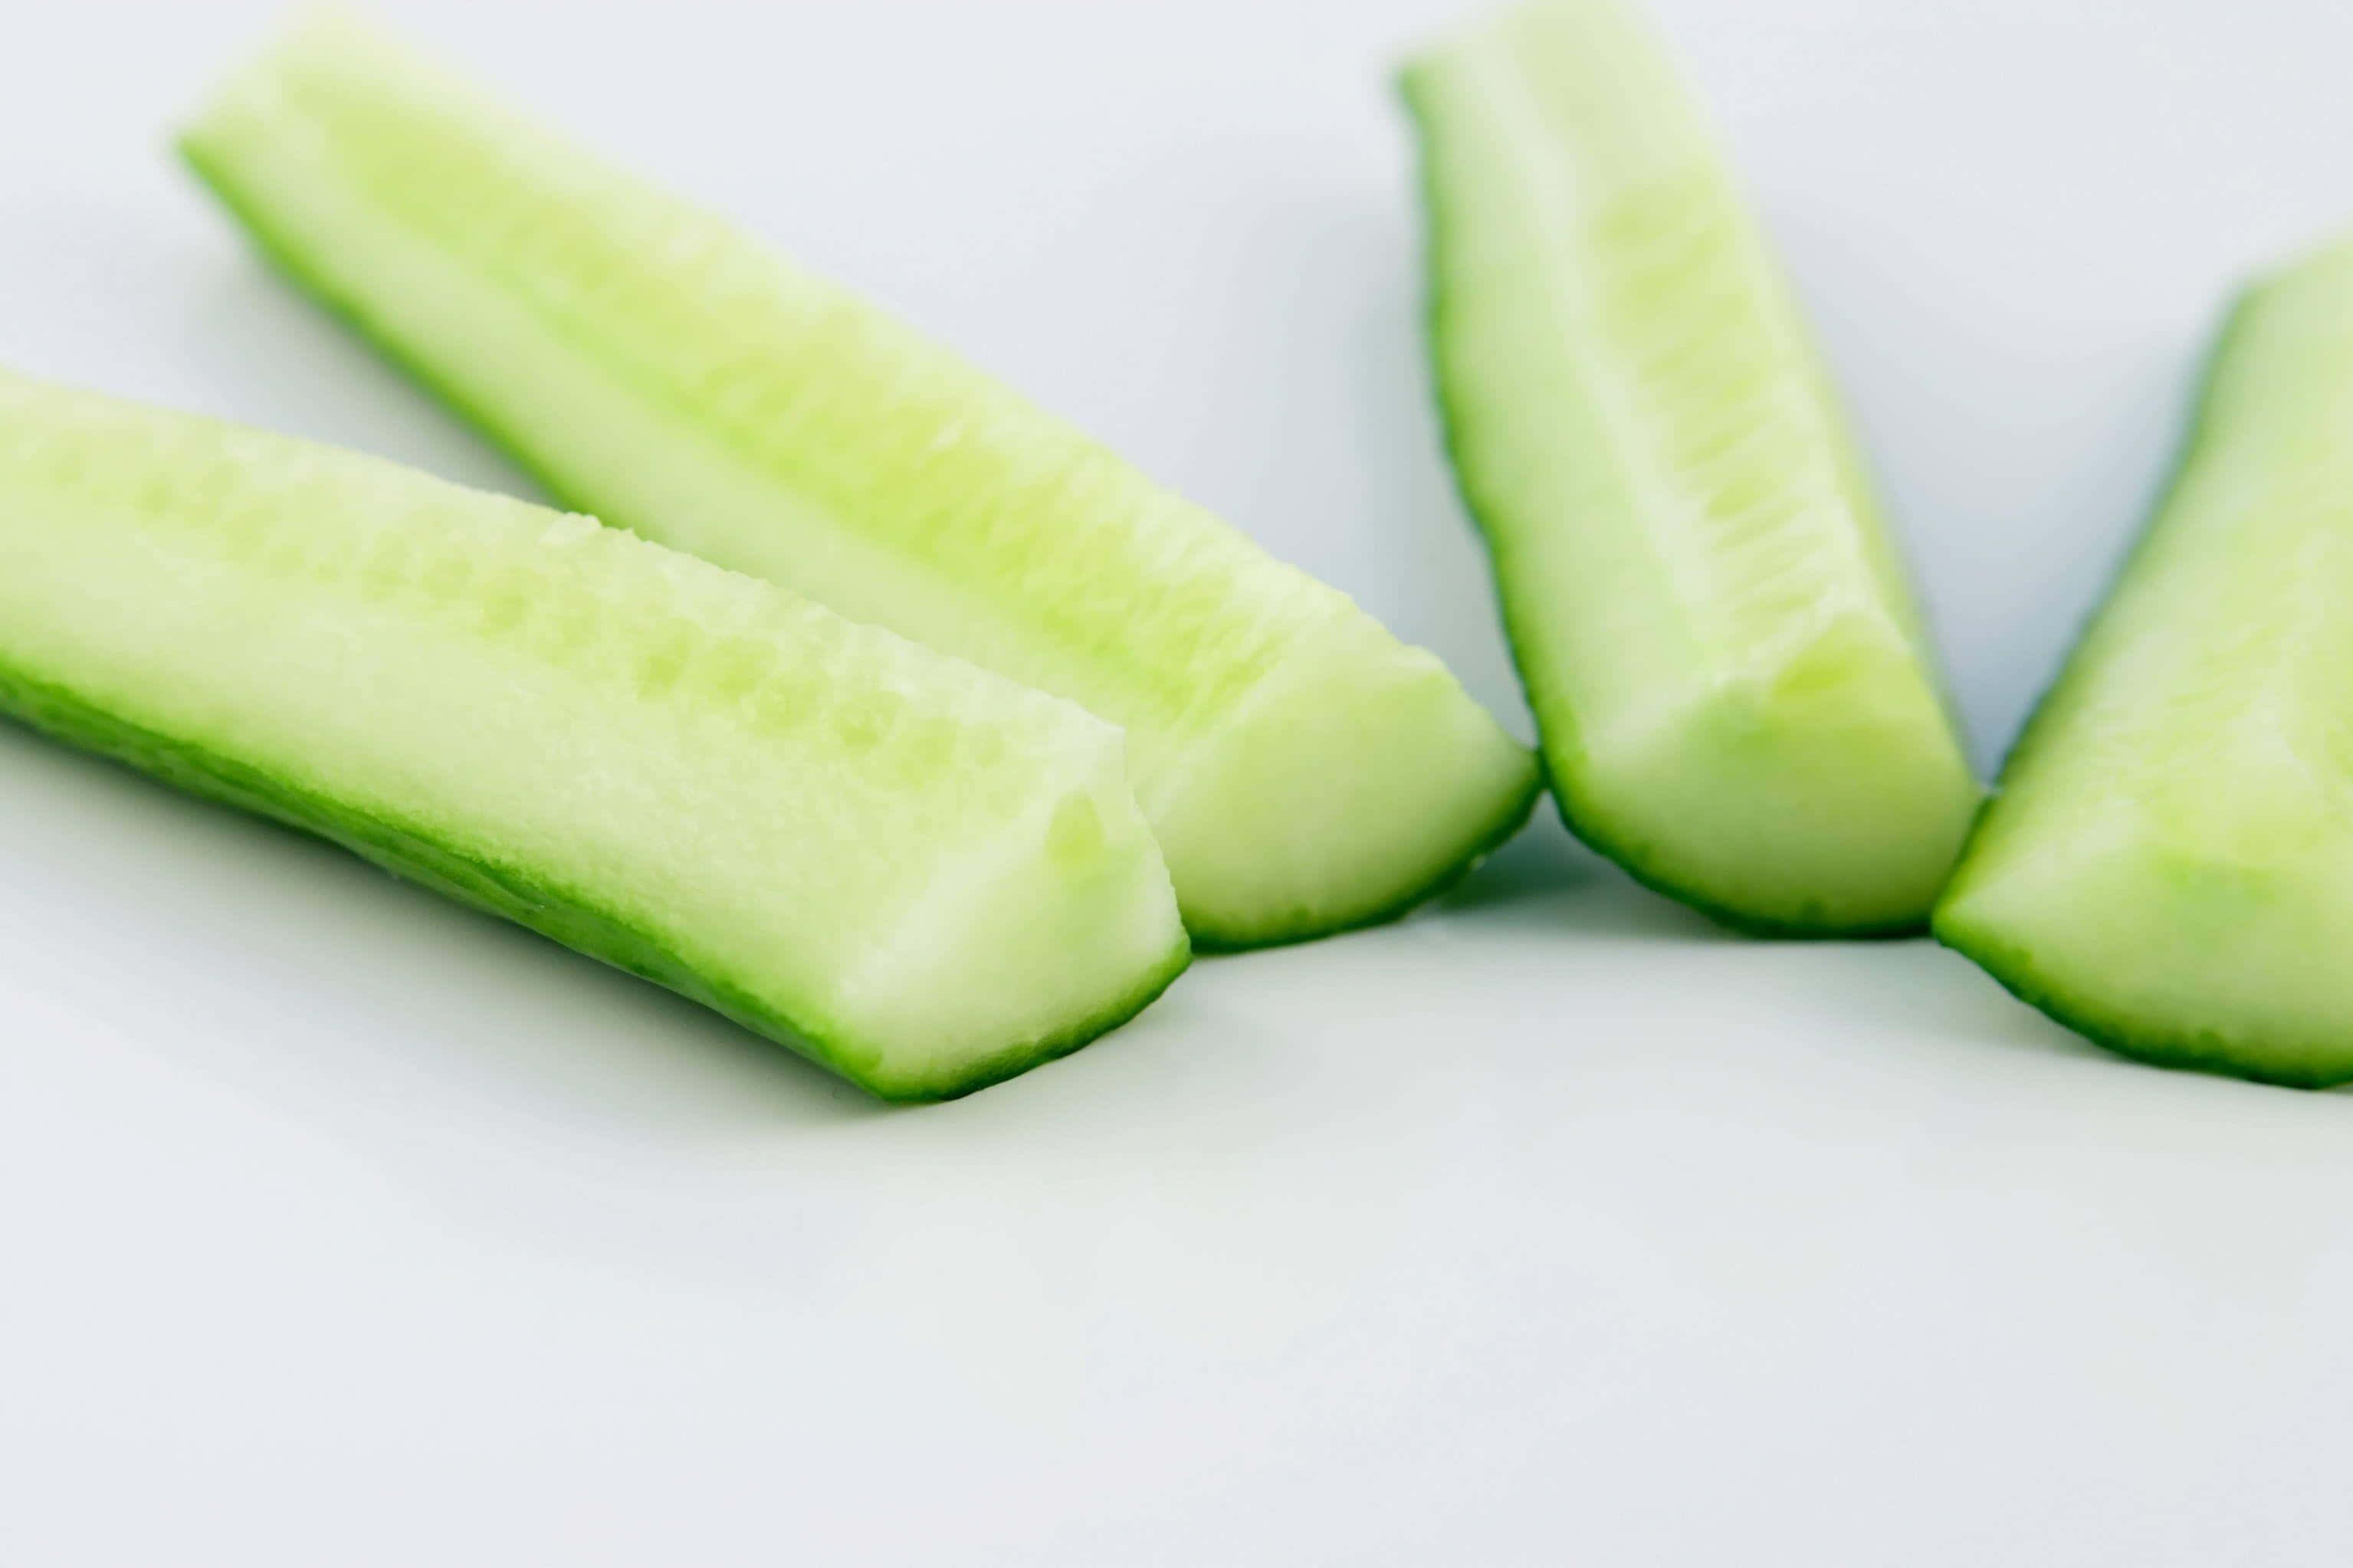 Green, Crunchy and Refreshing - The Perfect Cucumber